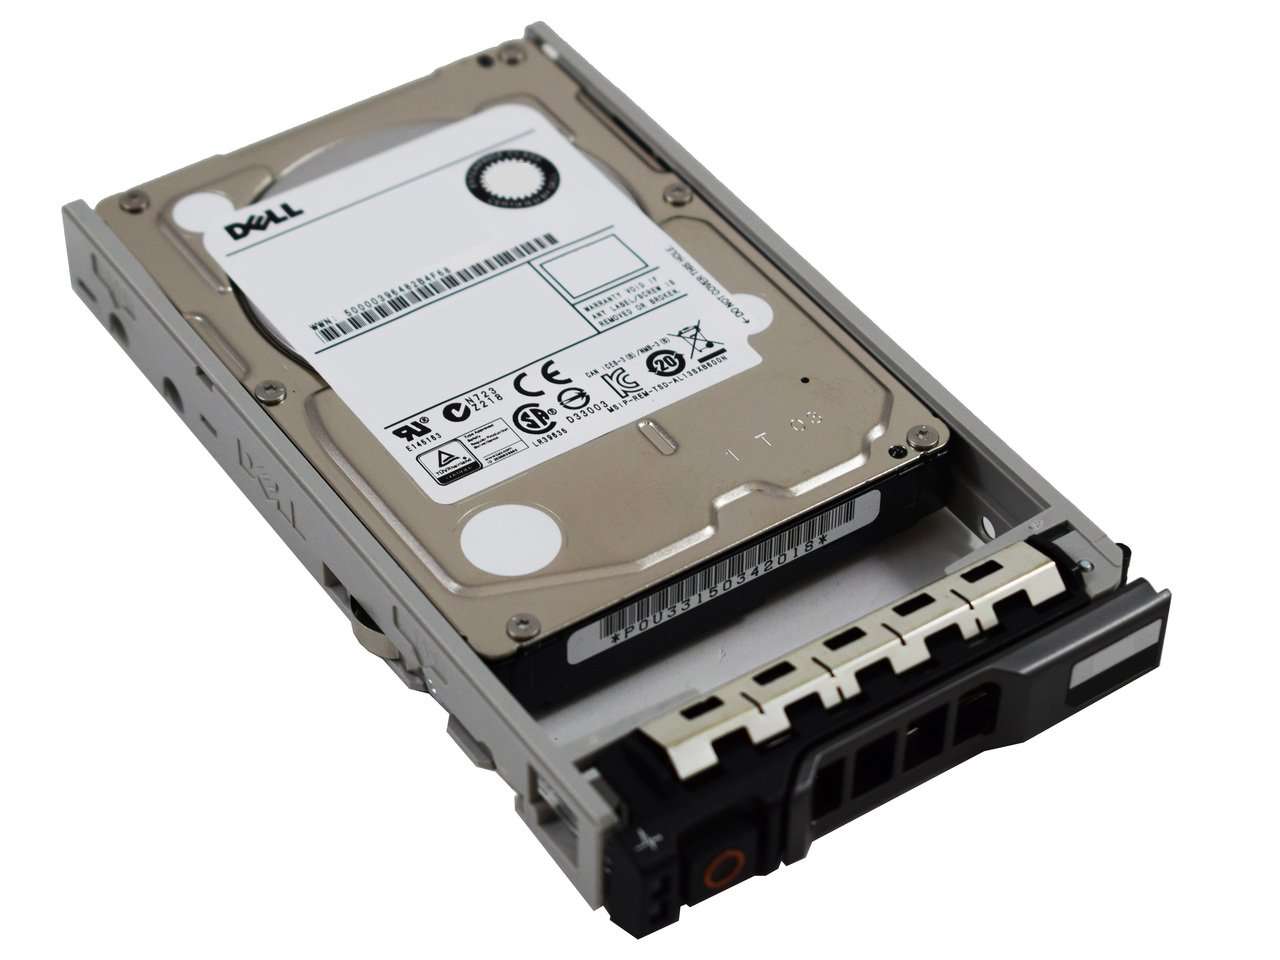 Dell G13 WCGG8 600GB 15K RPM SAS 6Gb/s 512n 2.5" Manufacturer Recertified HDD